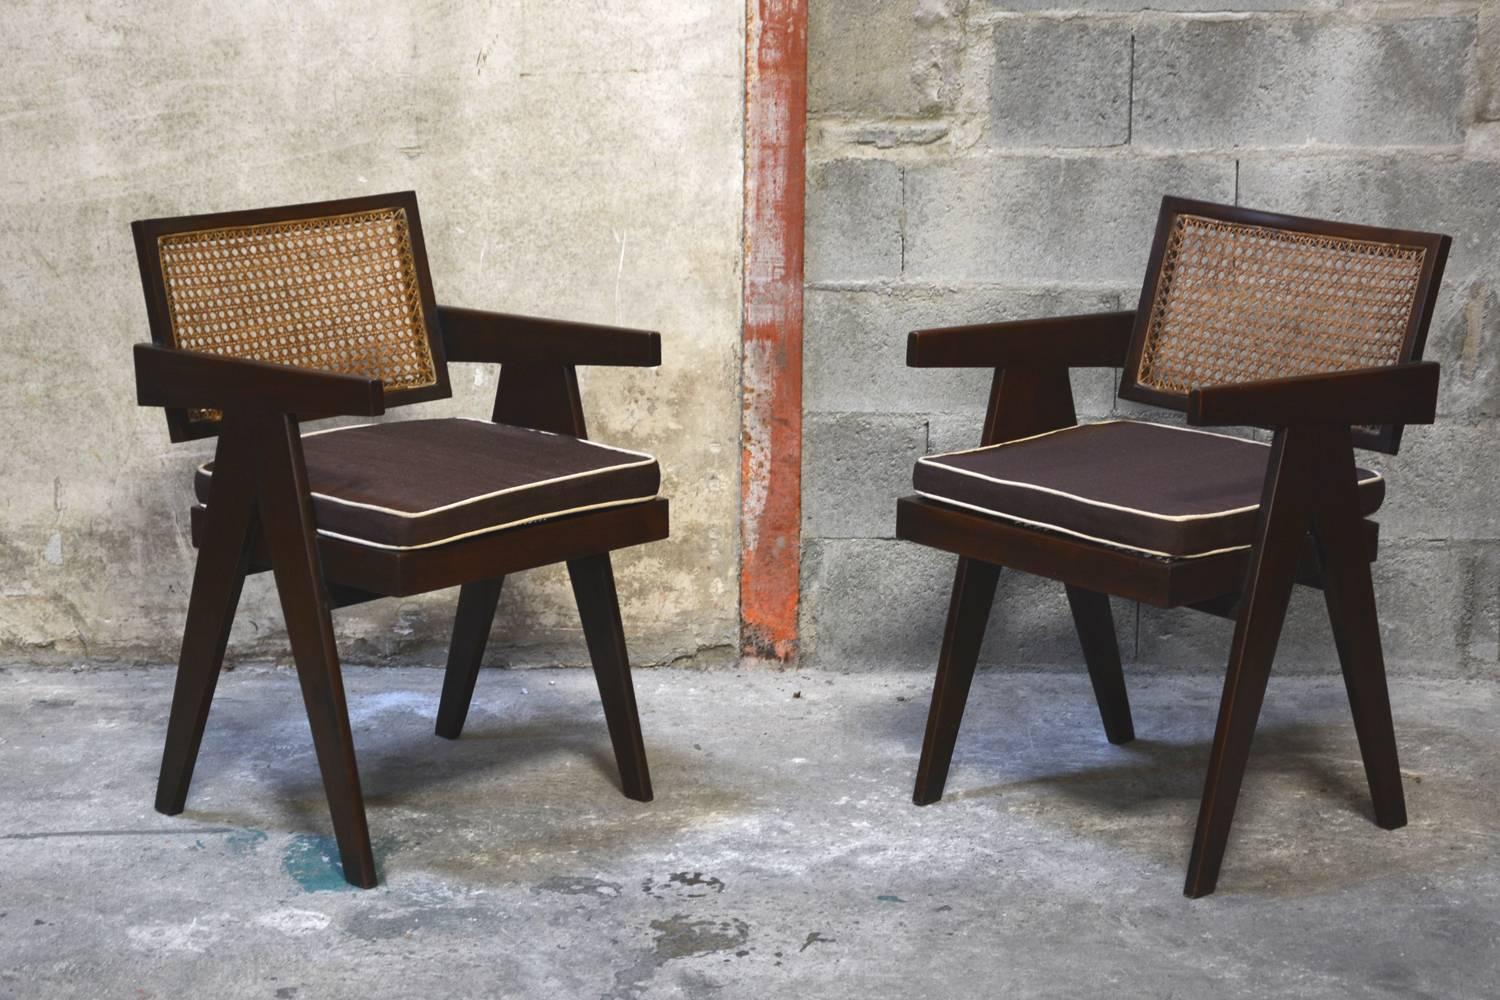 Pierre Jeanneret, set of two cane and teak wood office armchairs from administrative buildings in Chandigarh, India. Version with back separated from the seat. Teak, woven cane and upholstered seat cushion featuring cloth covering.
Original